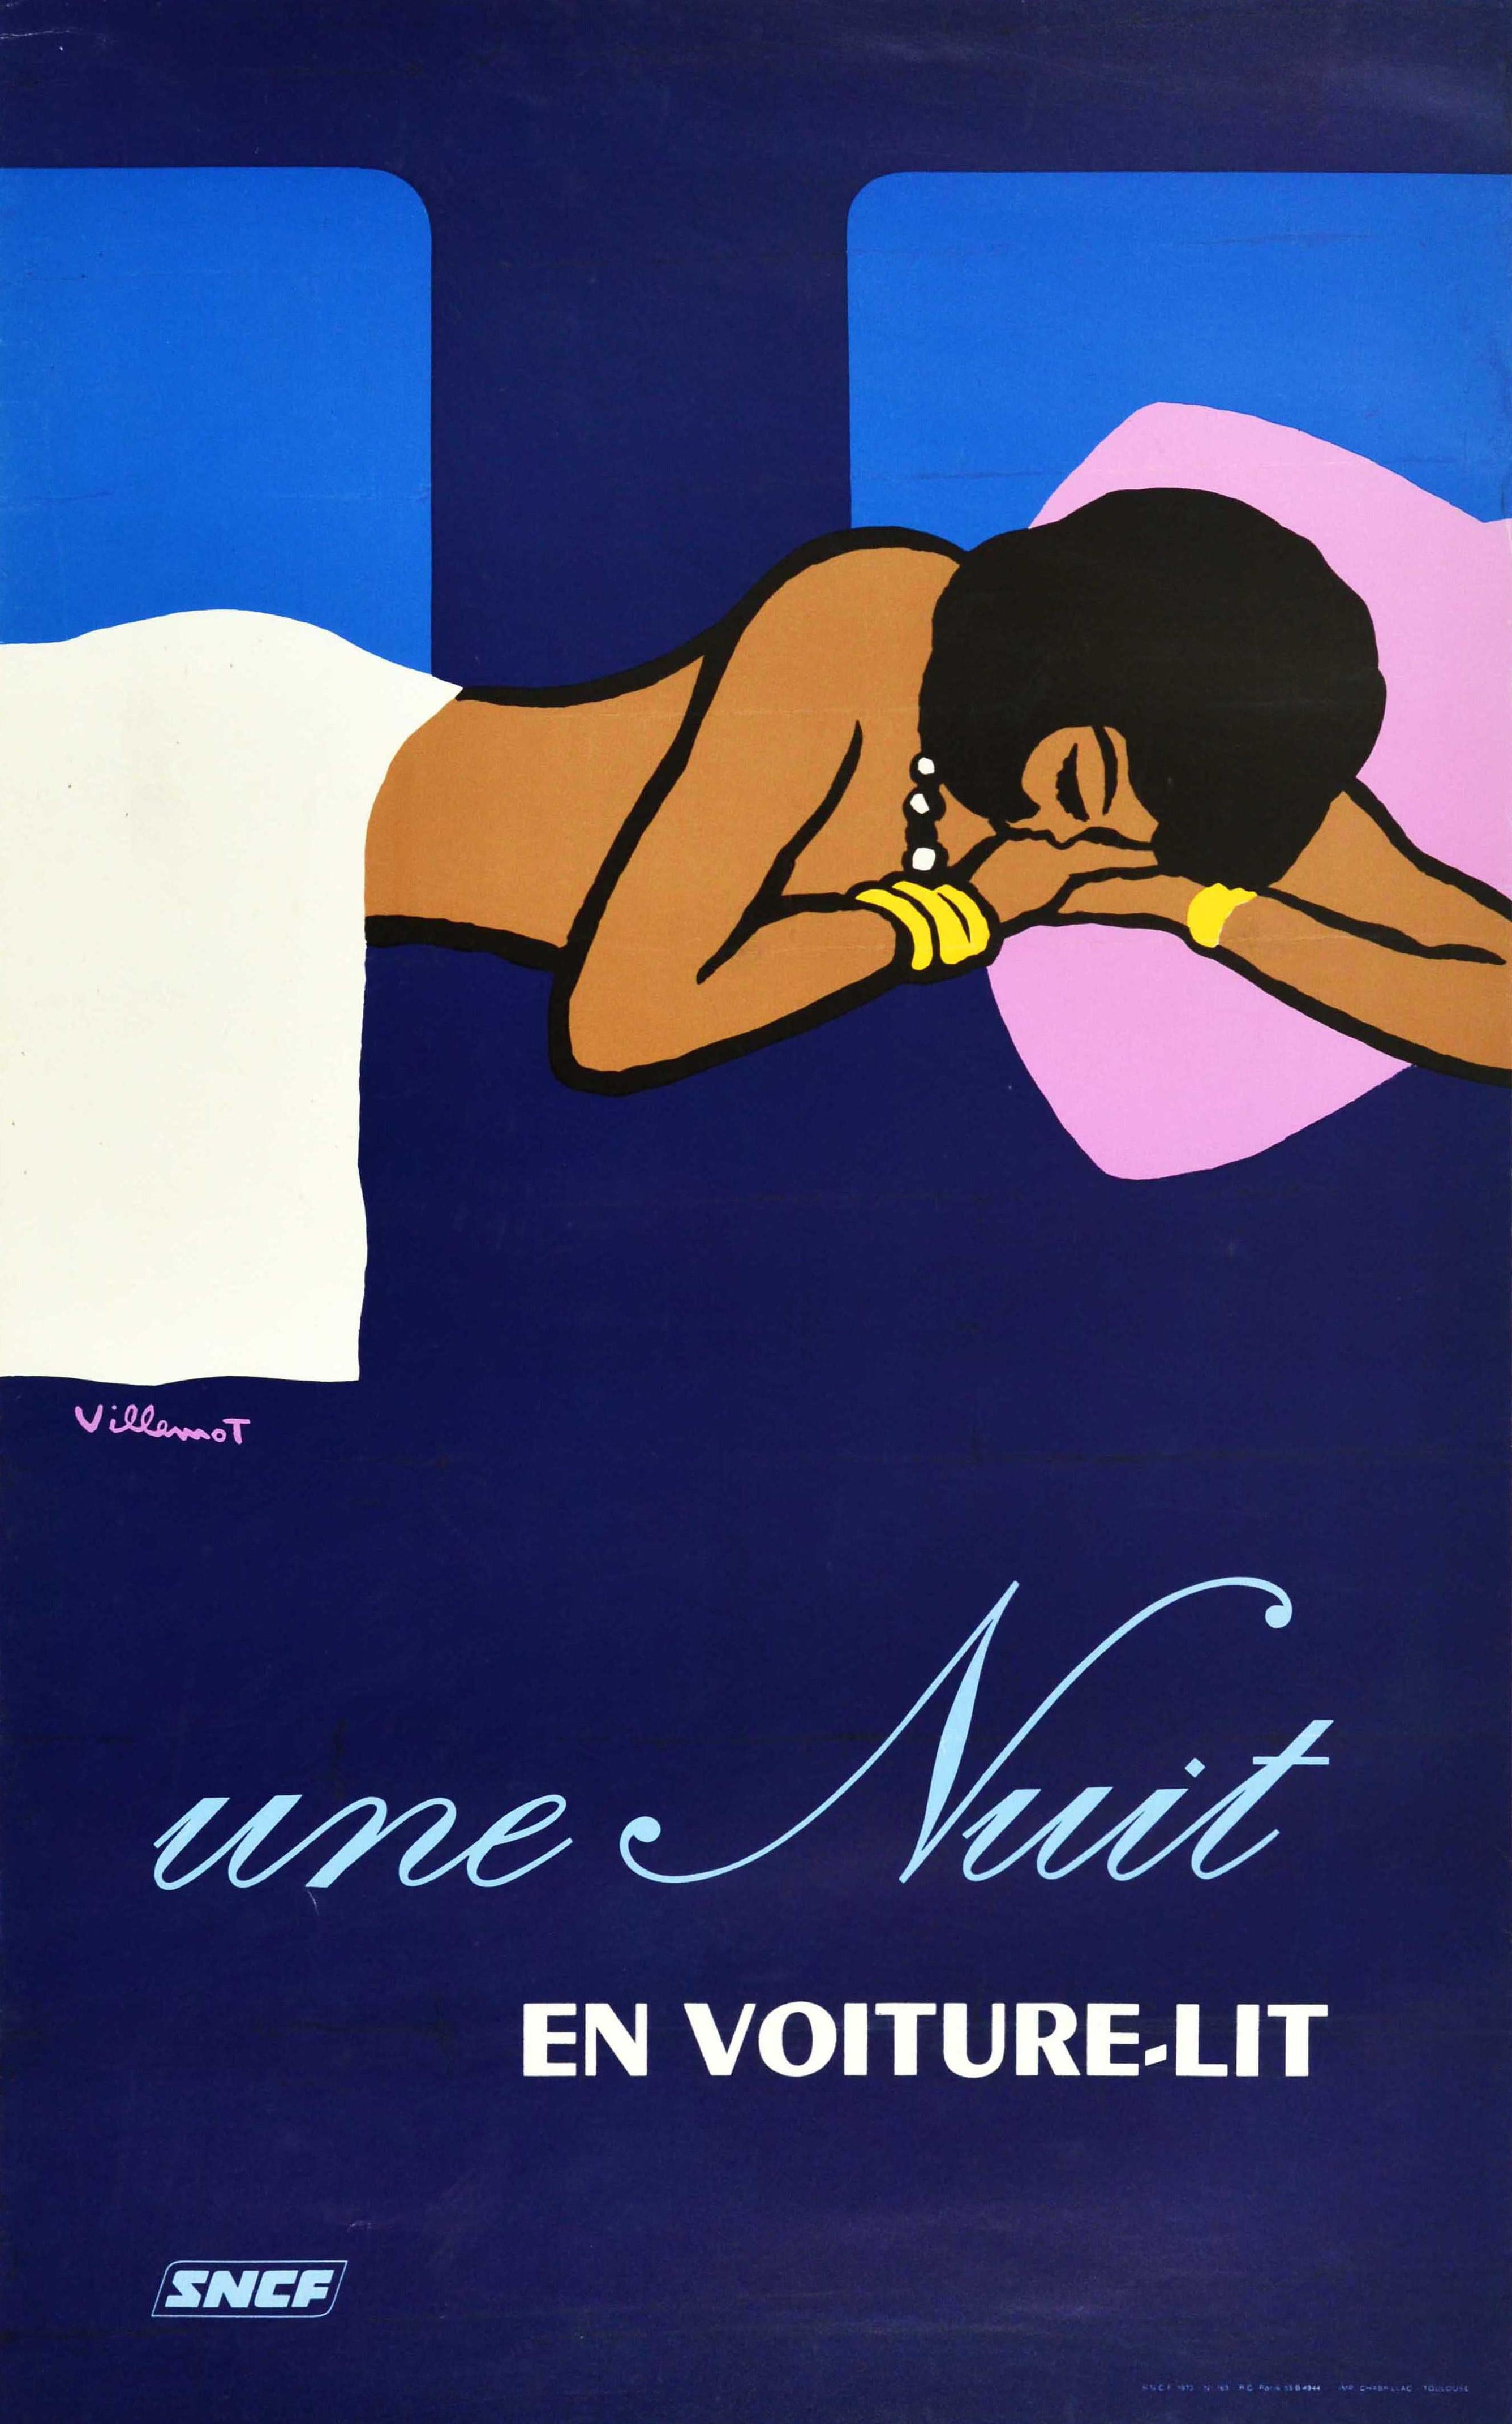 Original vintage travel advertising poster published by French Railways SNCF to promote the sleeping carriages available on its overnight services - Une nuit en voiture lits - featuring a great design by the French graphic artist Bernard Villemot